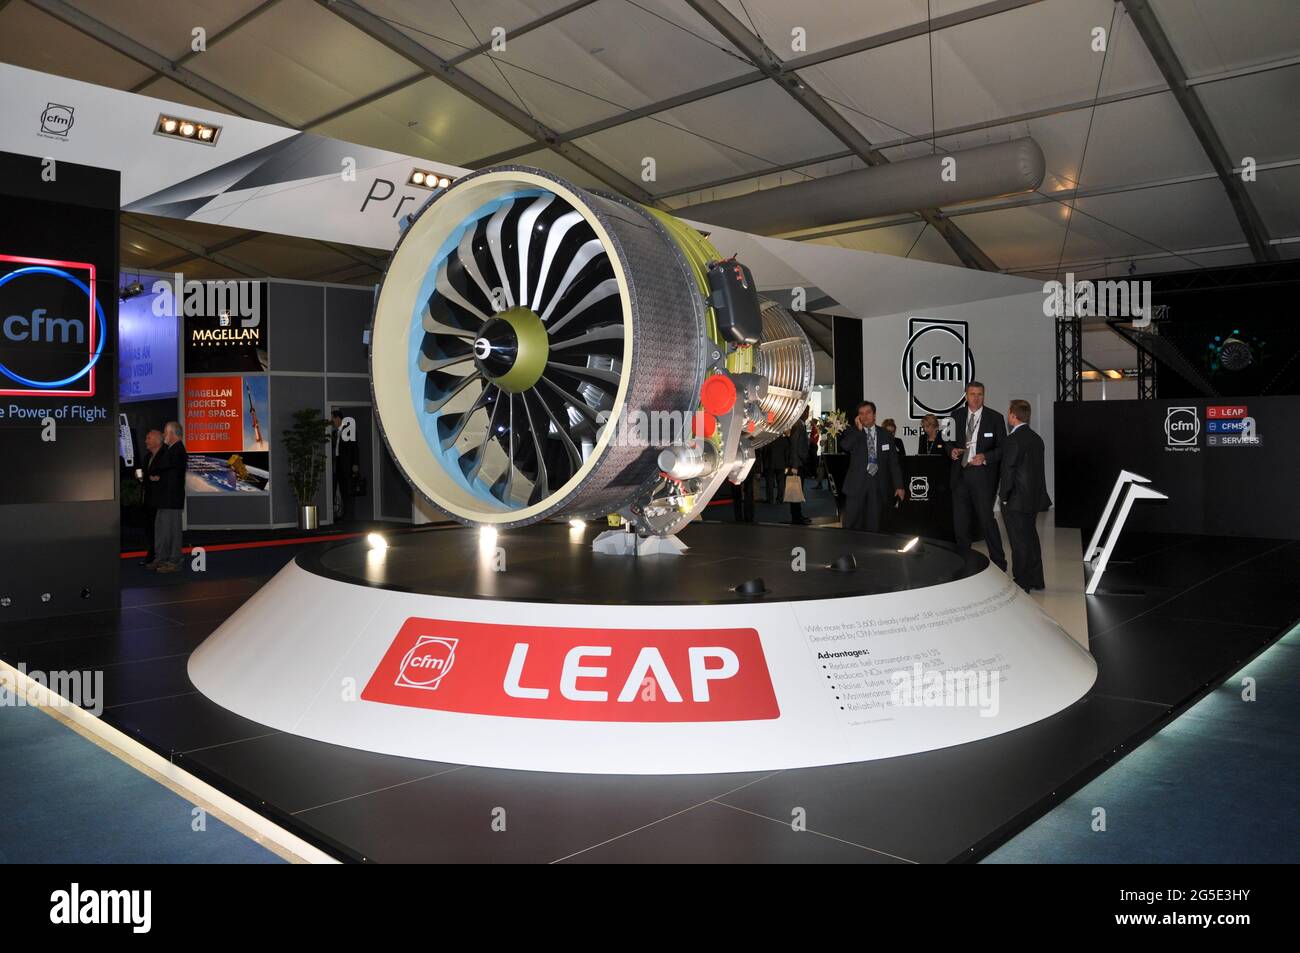 CFM International LEAP high-bypass turbofan engine display stand at the Farnborough International Airshow trade fair 2012, UK. Trade stand in Hall Stock Photo